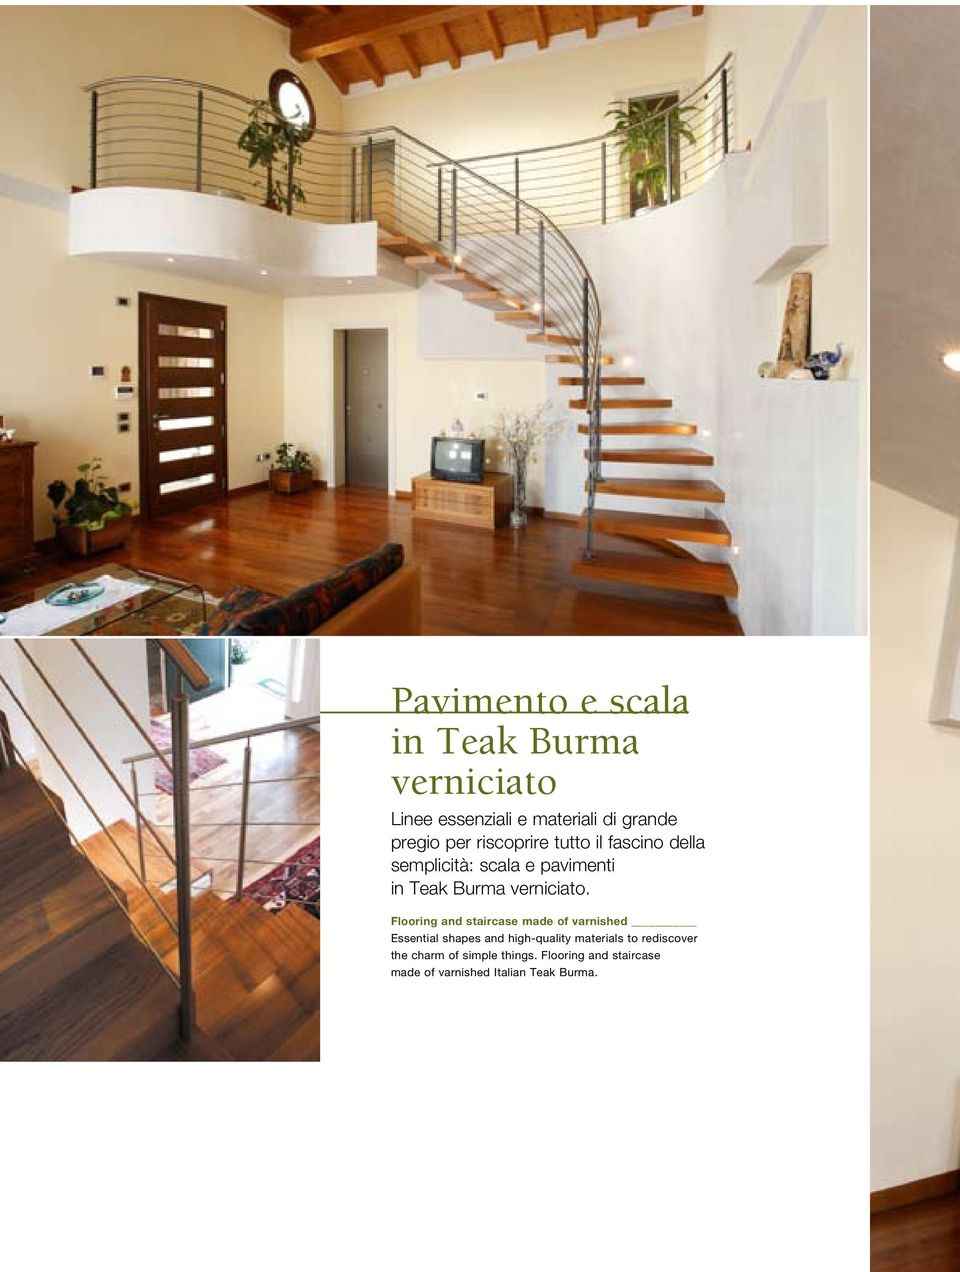 Flooring and staircase made of varnished Essential shapes and high-quality materials to